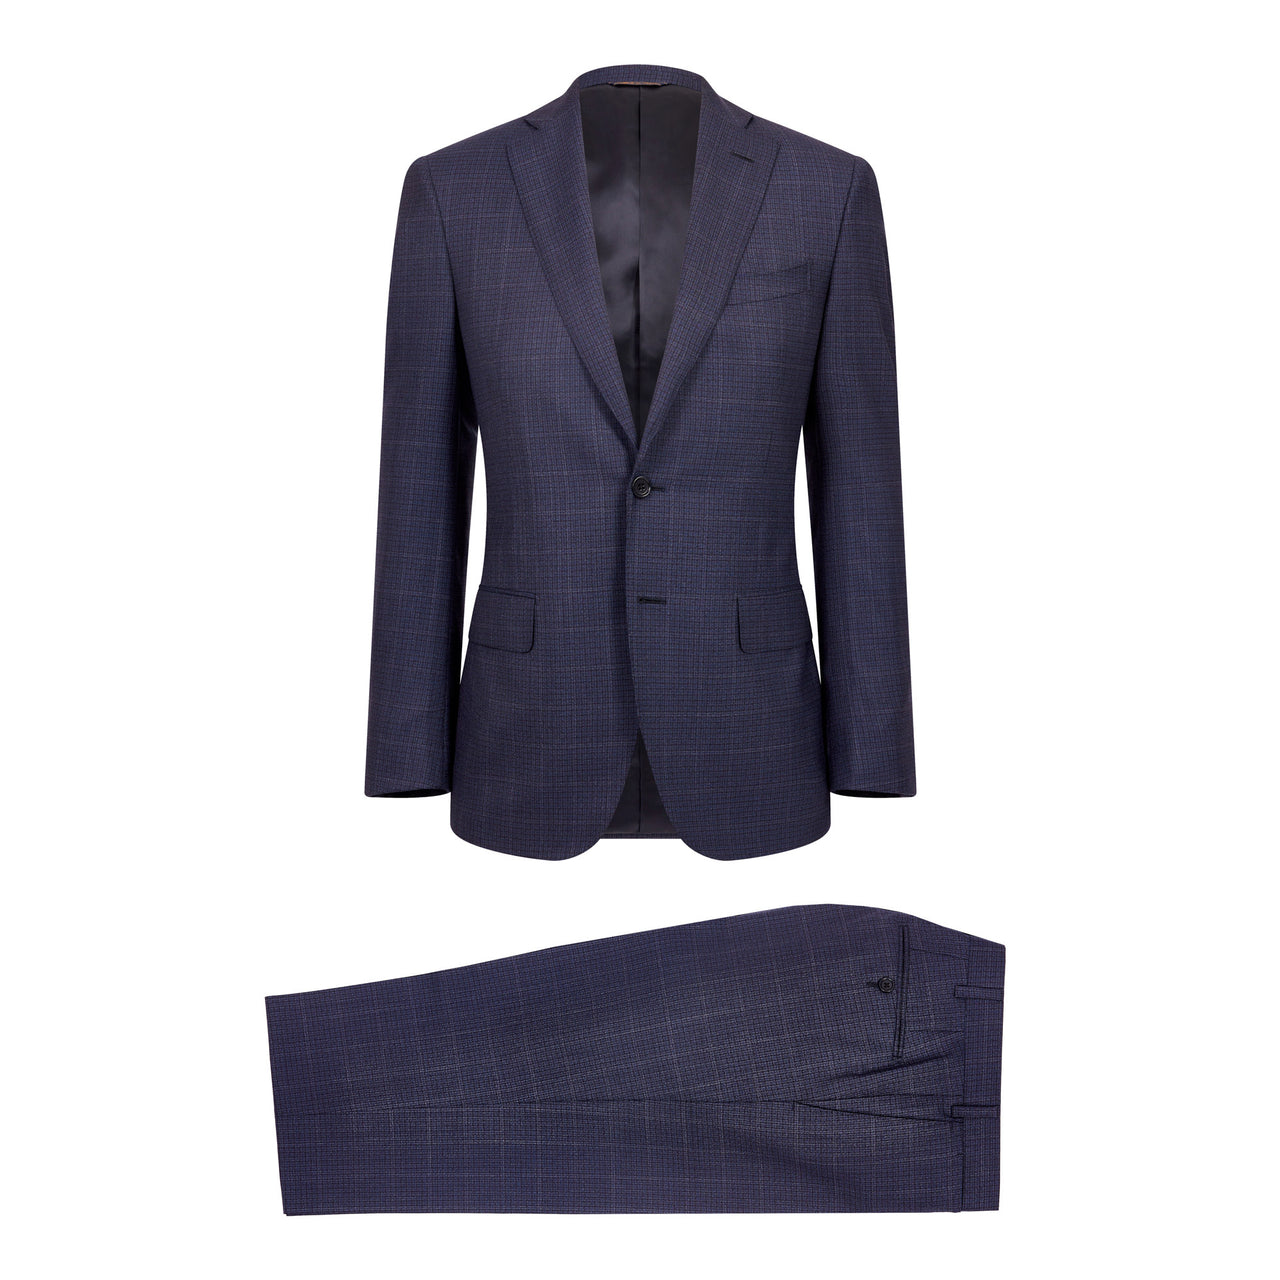 HENRY SARTORIAL HERITAGE Zegna Traveller™ Microcheck Travel Twill Suit NAVY/CHARCOAL